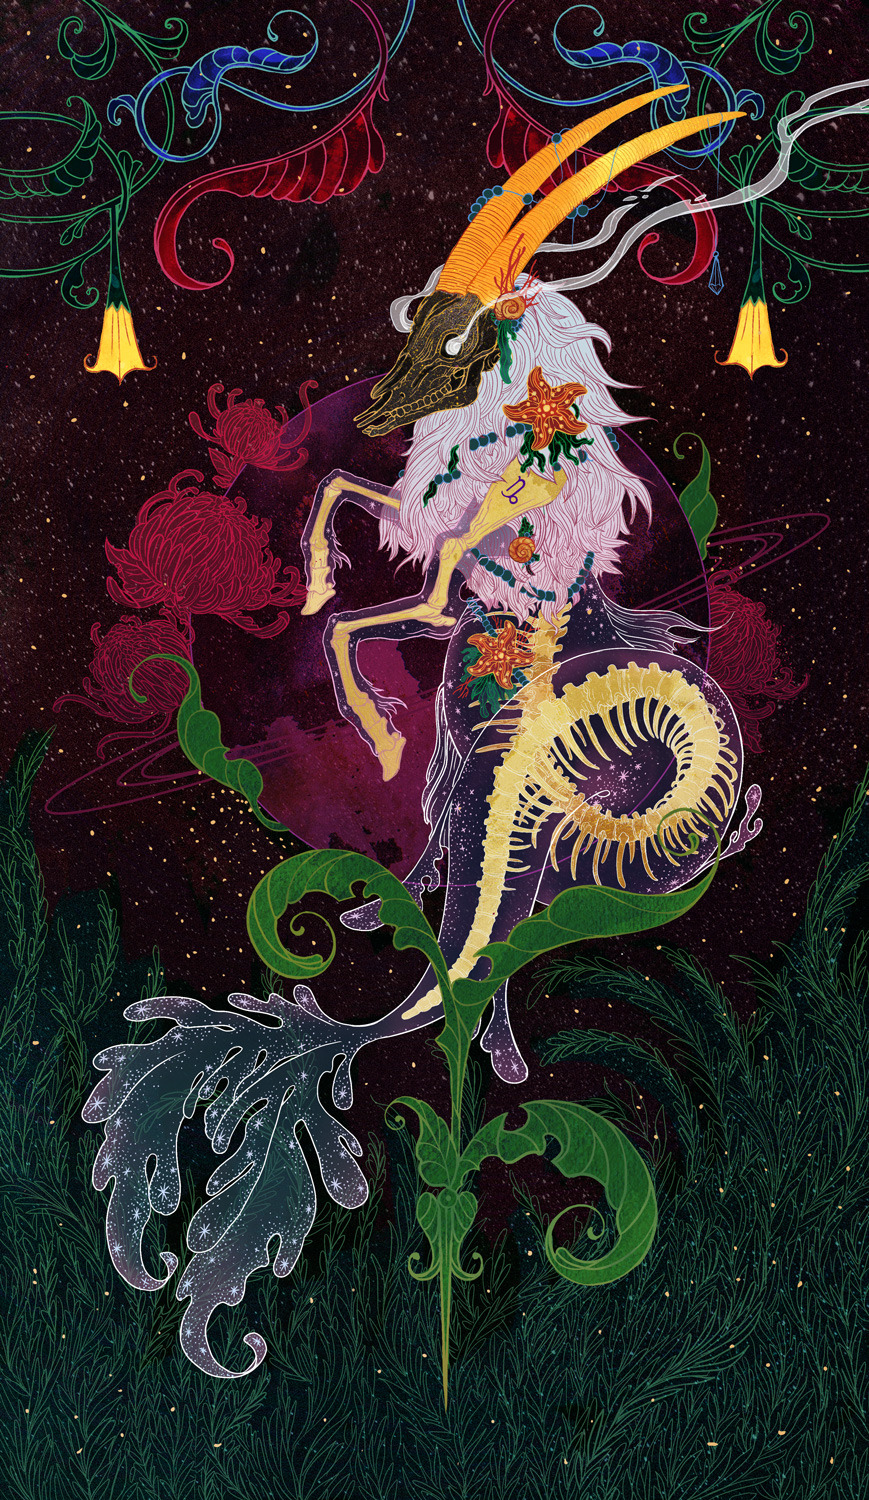 Submitted by @ambisun
“Capricorn Card made for The Woven Path Tarot by Ambi Sun.
Happy Capricorn Season!
”